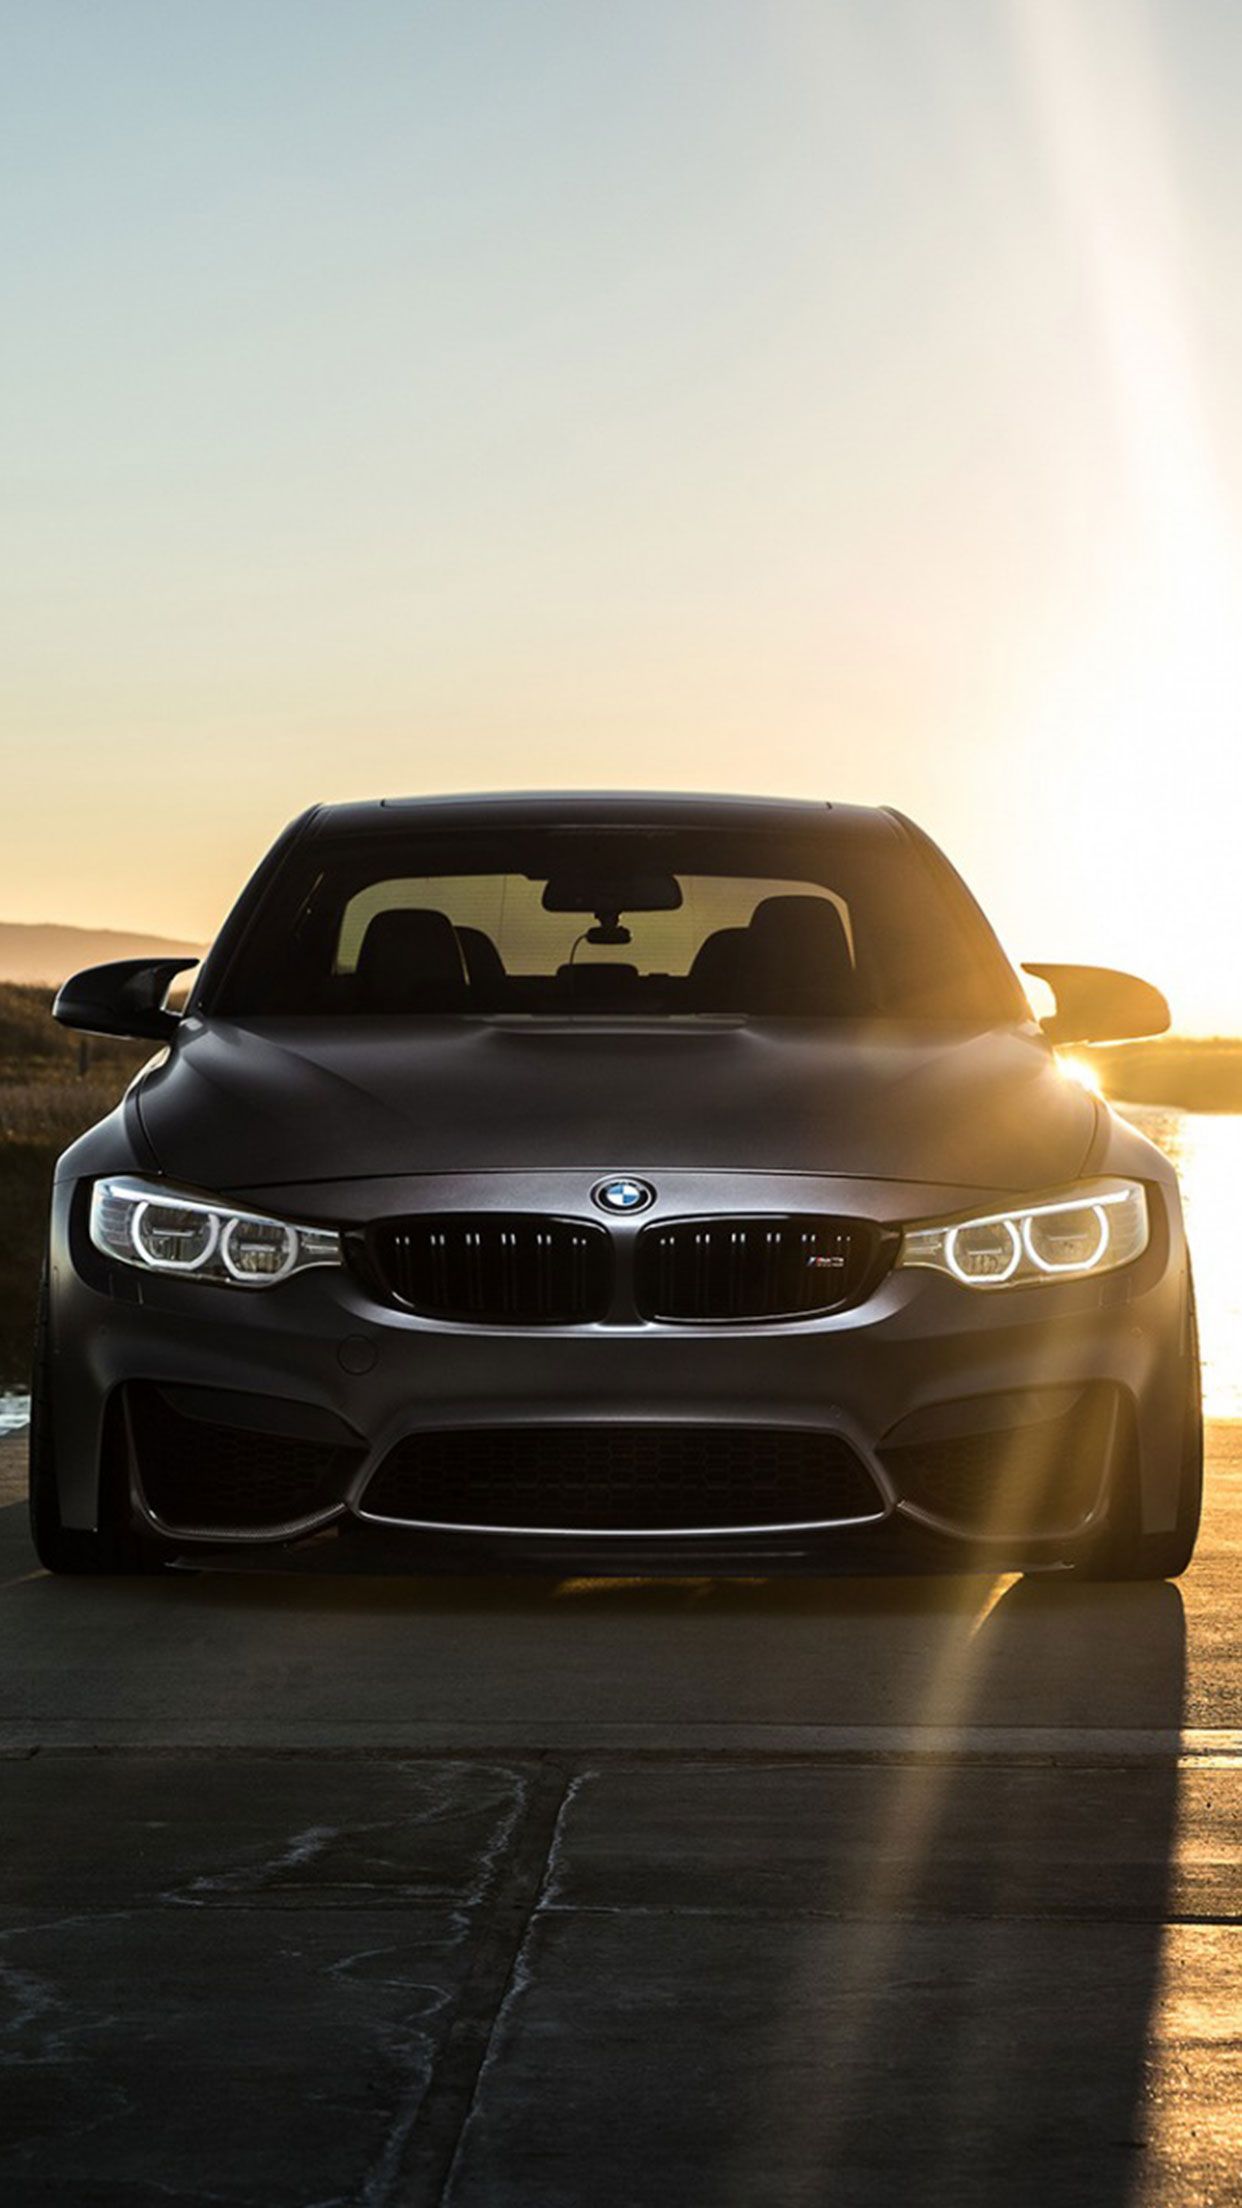 Free download Grey BMW car wallpaper for iPhone and Android BMW